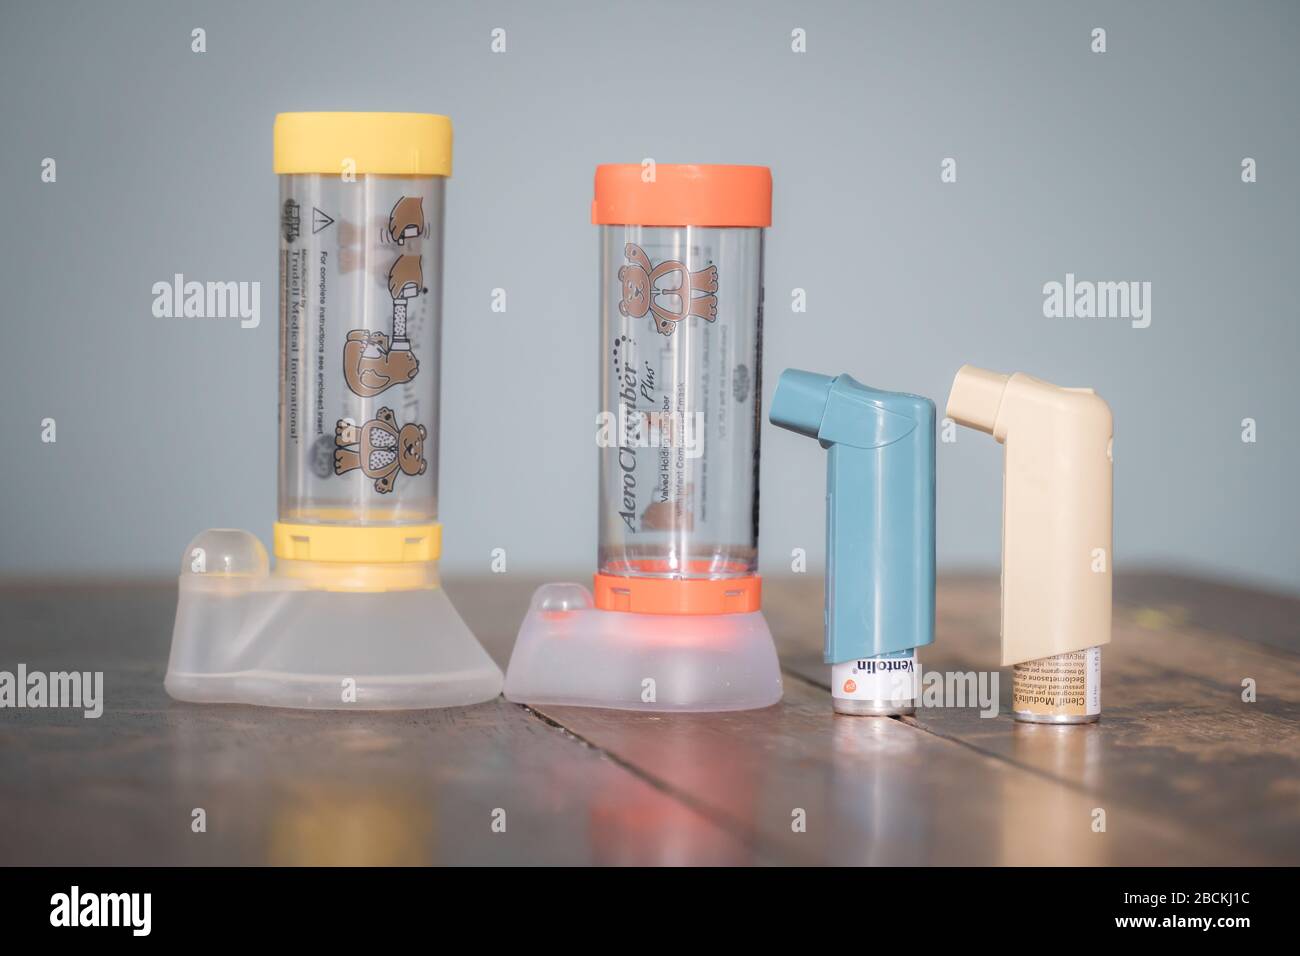 London, UK - April 3, 2020 - Ventolin and Clenil inhalers and Aerochamber spacers (child and infant); common medications for asthma treatment Stock Photo